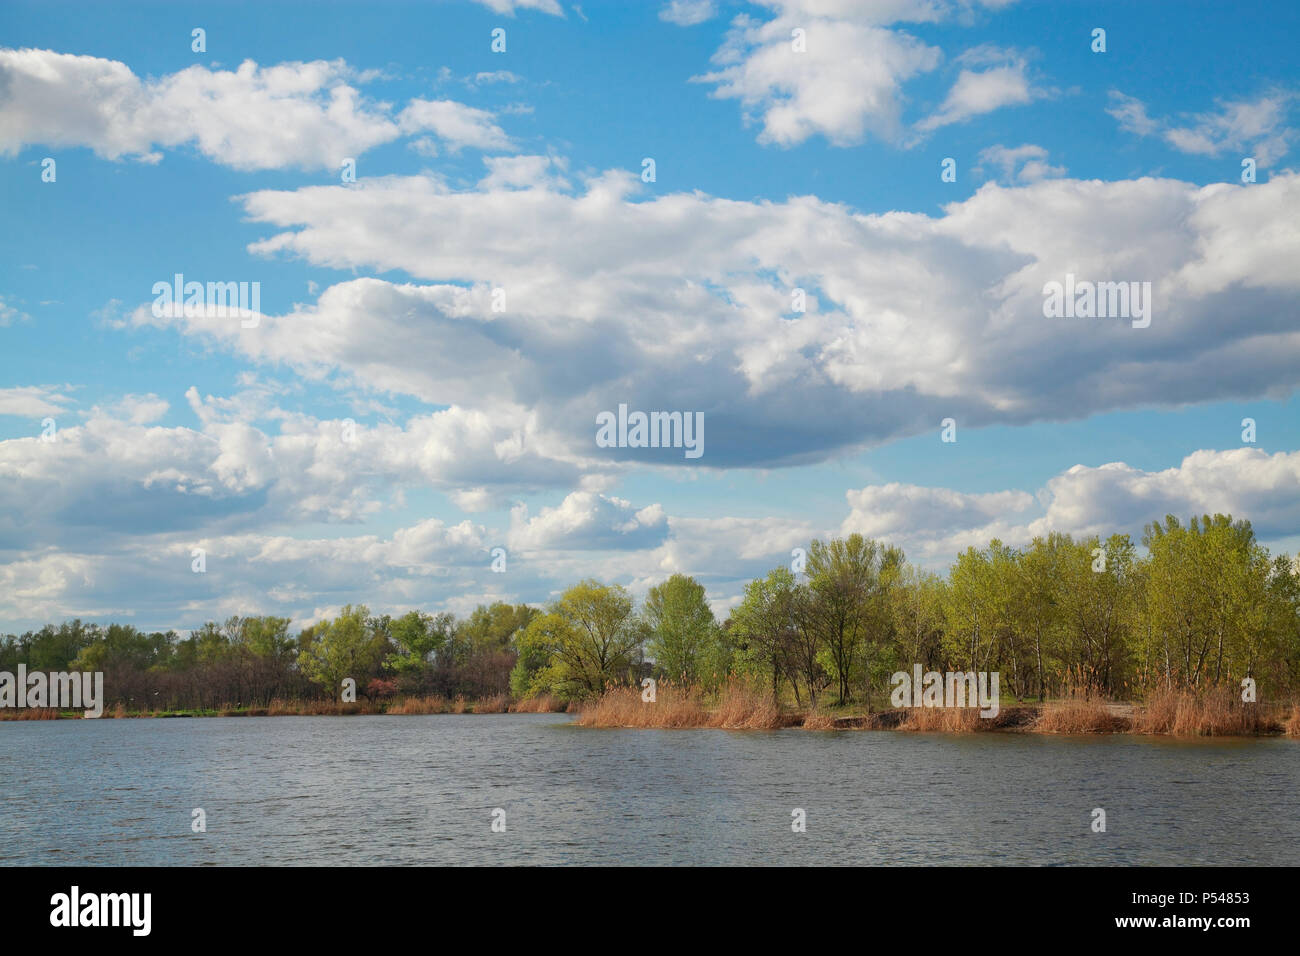 In this landscape of river, forest, cloudy sky Stock Photo